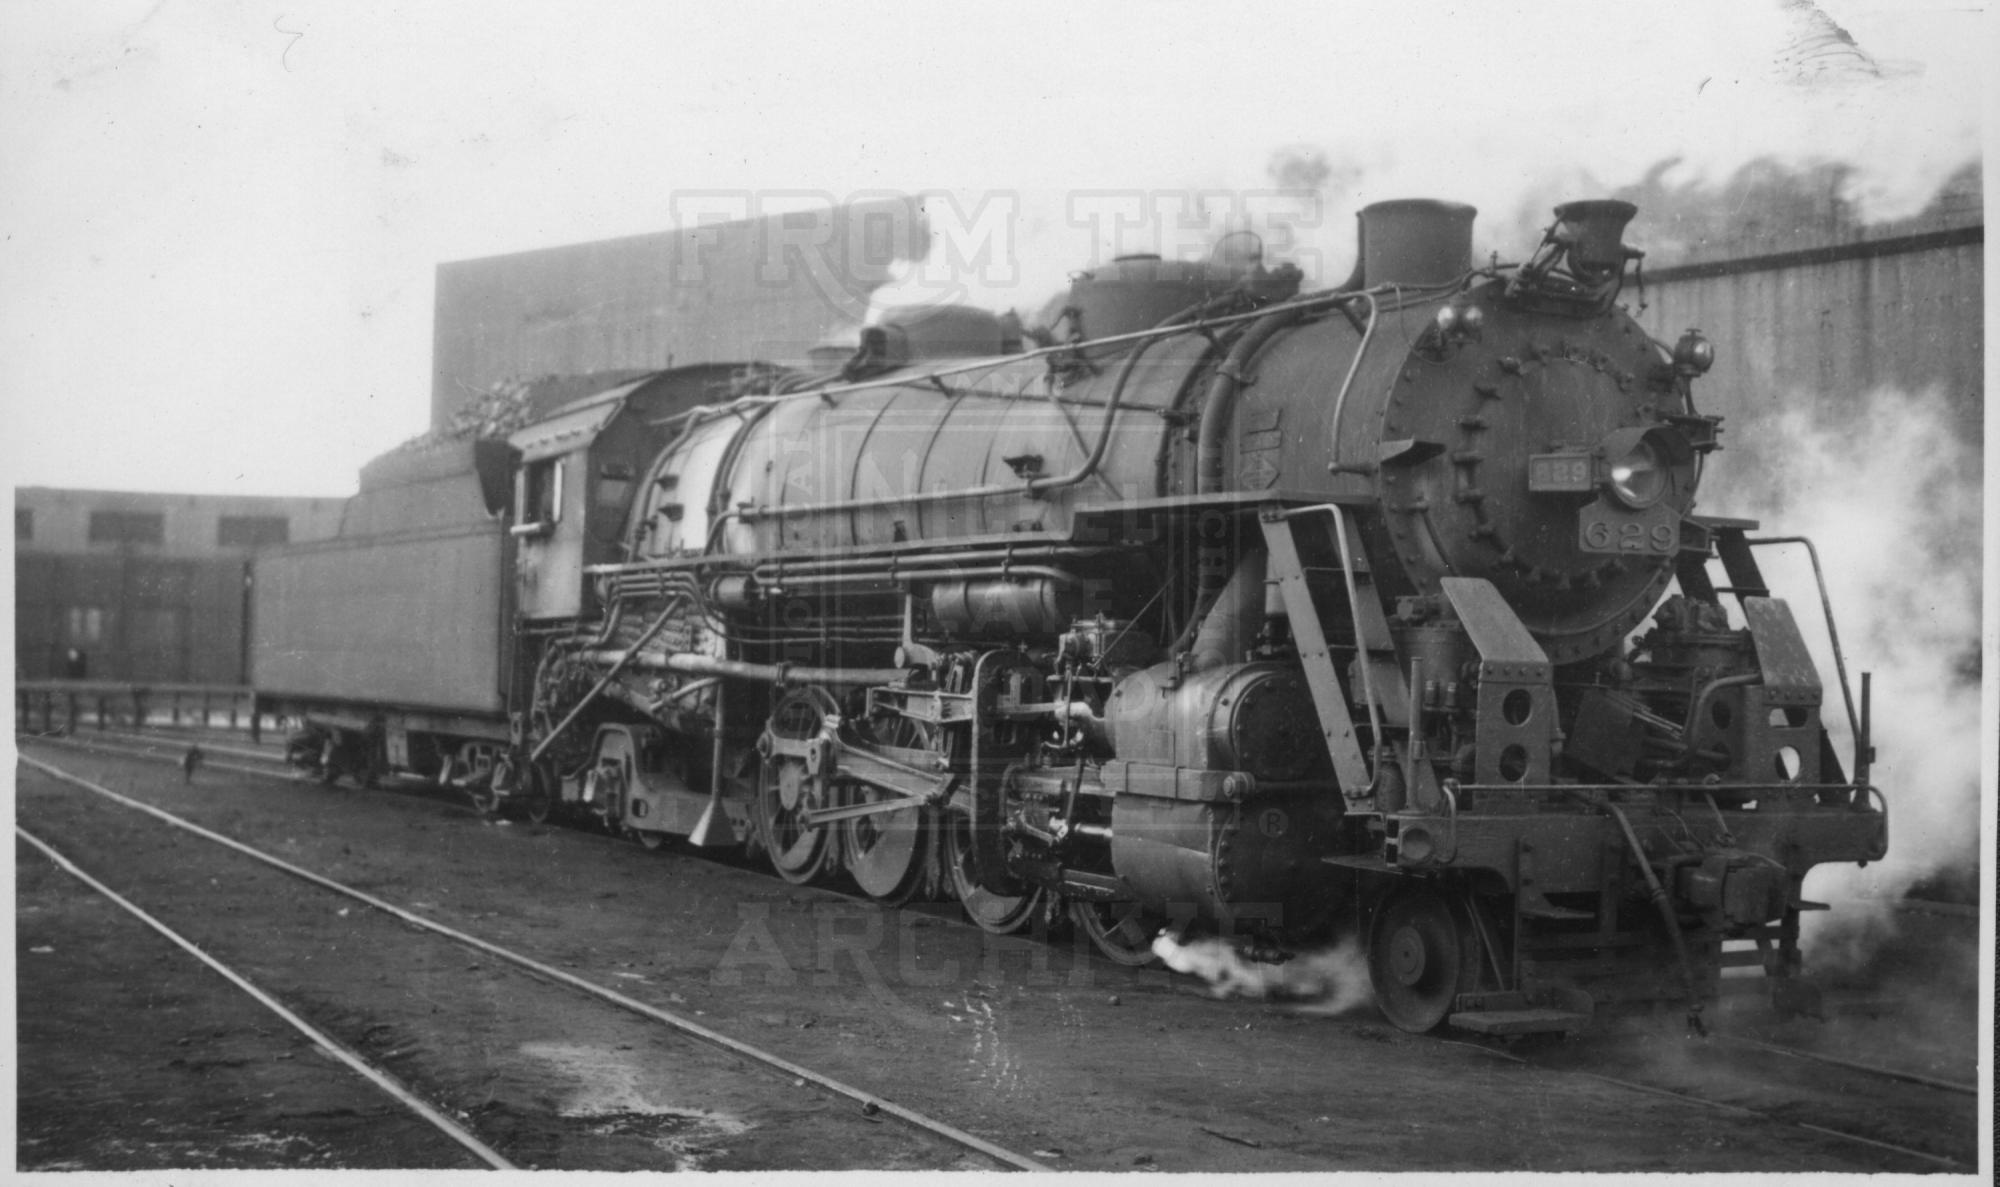 NKP H-6d 629 Conneaut OH 8-20-1936 | The Nickel Plate Archive